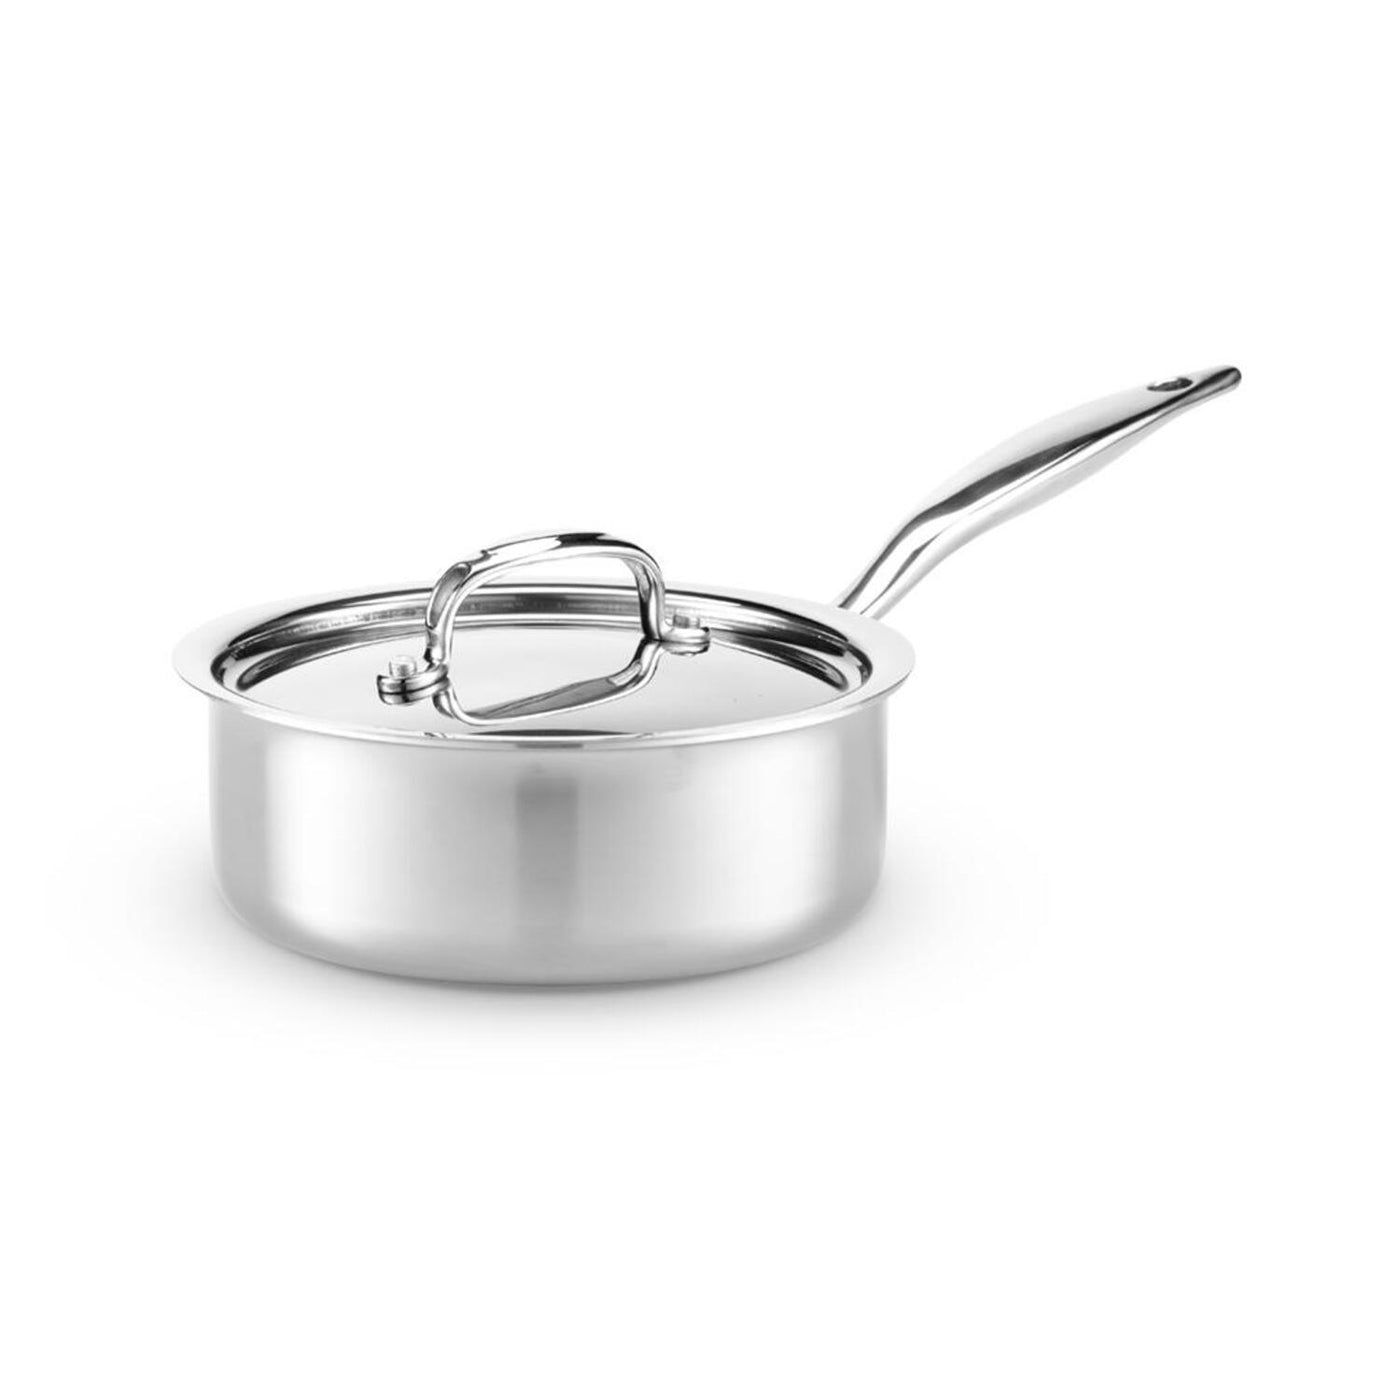 Heritage Steel Titanium Series 4 Quart Saucepan with Lid, 5-Ply Clad Stainless  Steel Cookware with 316Ti, Made in USA